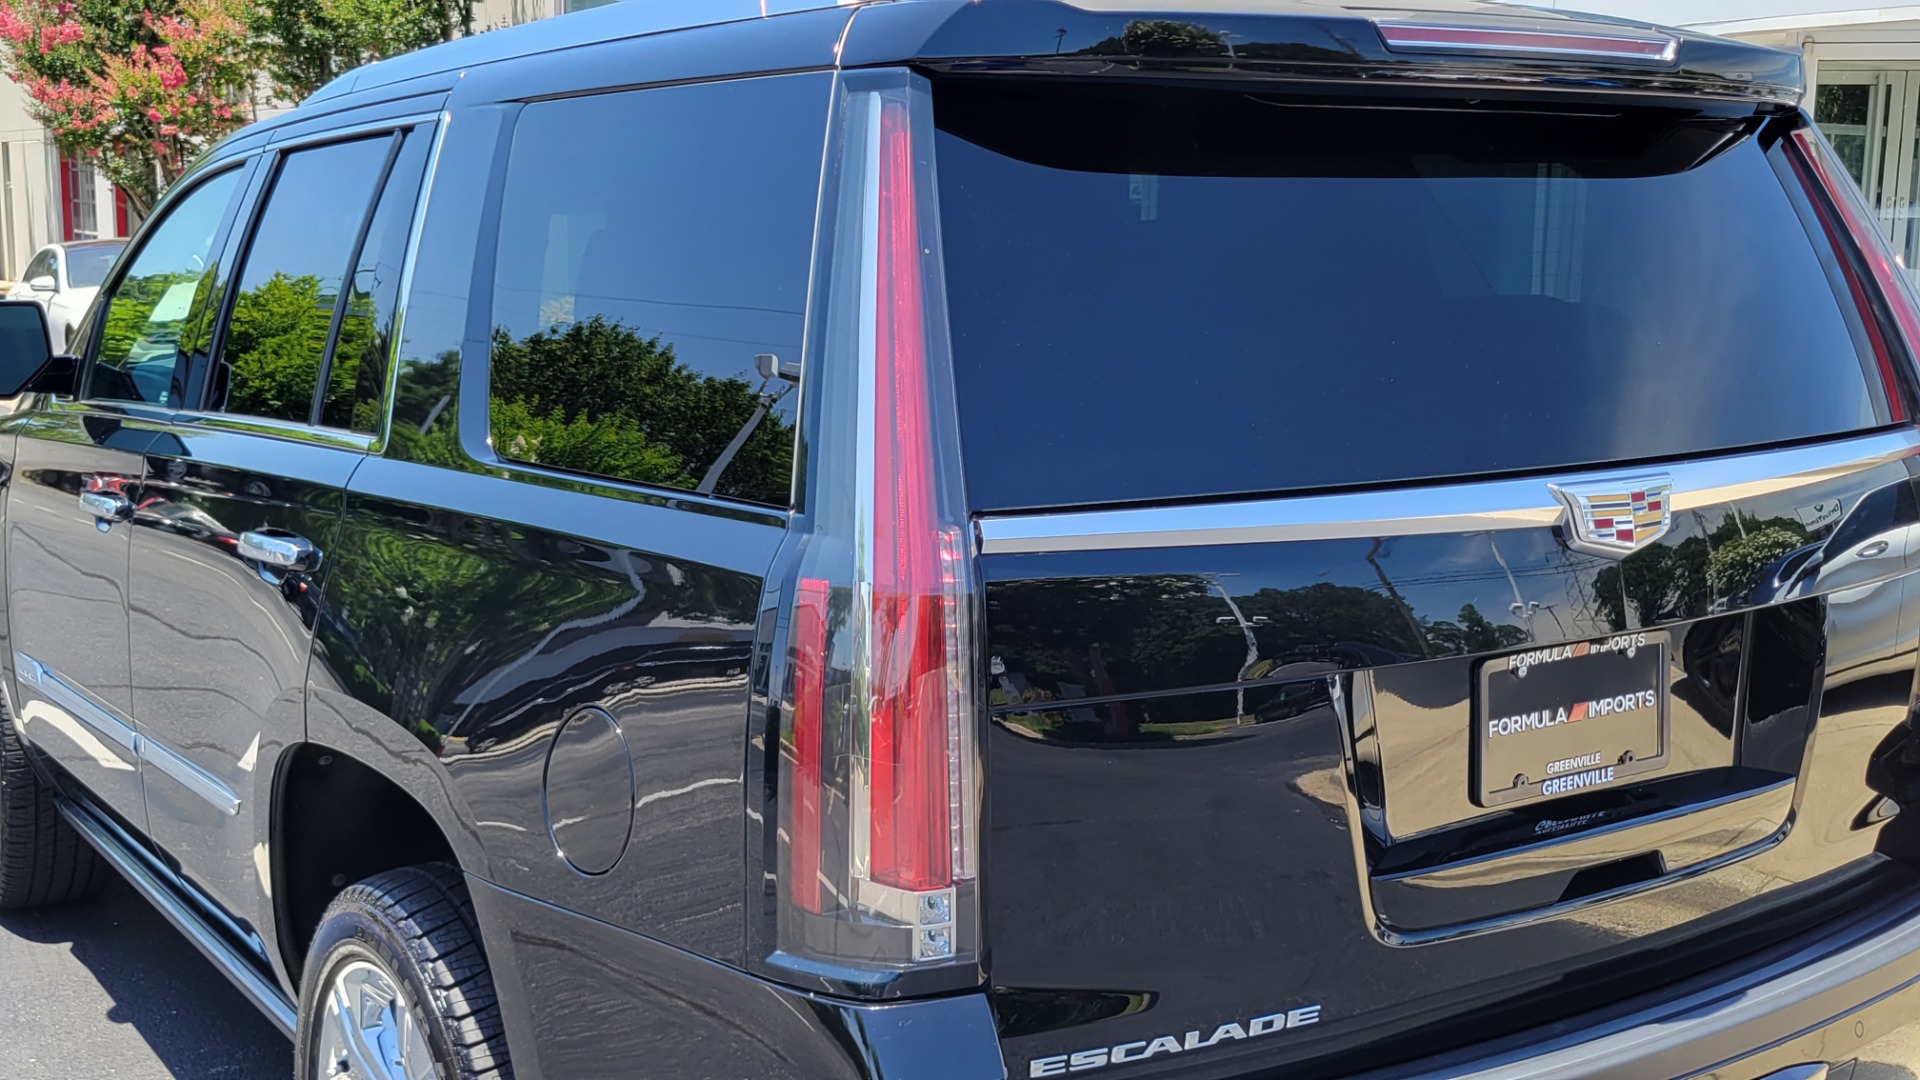 Used 2016 Cadillac ESCALADE PREMIUM COLLECTION / 6.2L / 4X4 / NAV / DVD / SUNROOF / 3-ROW for sale $58,995 at Formula Imports in Charlotte NC 28227 34